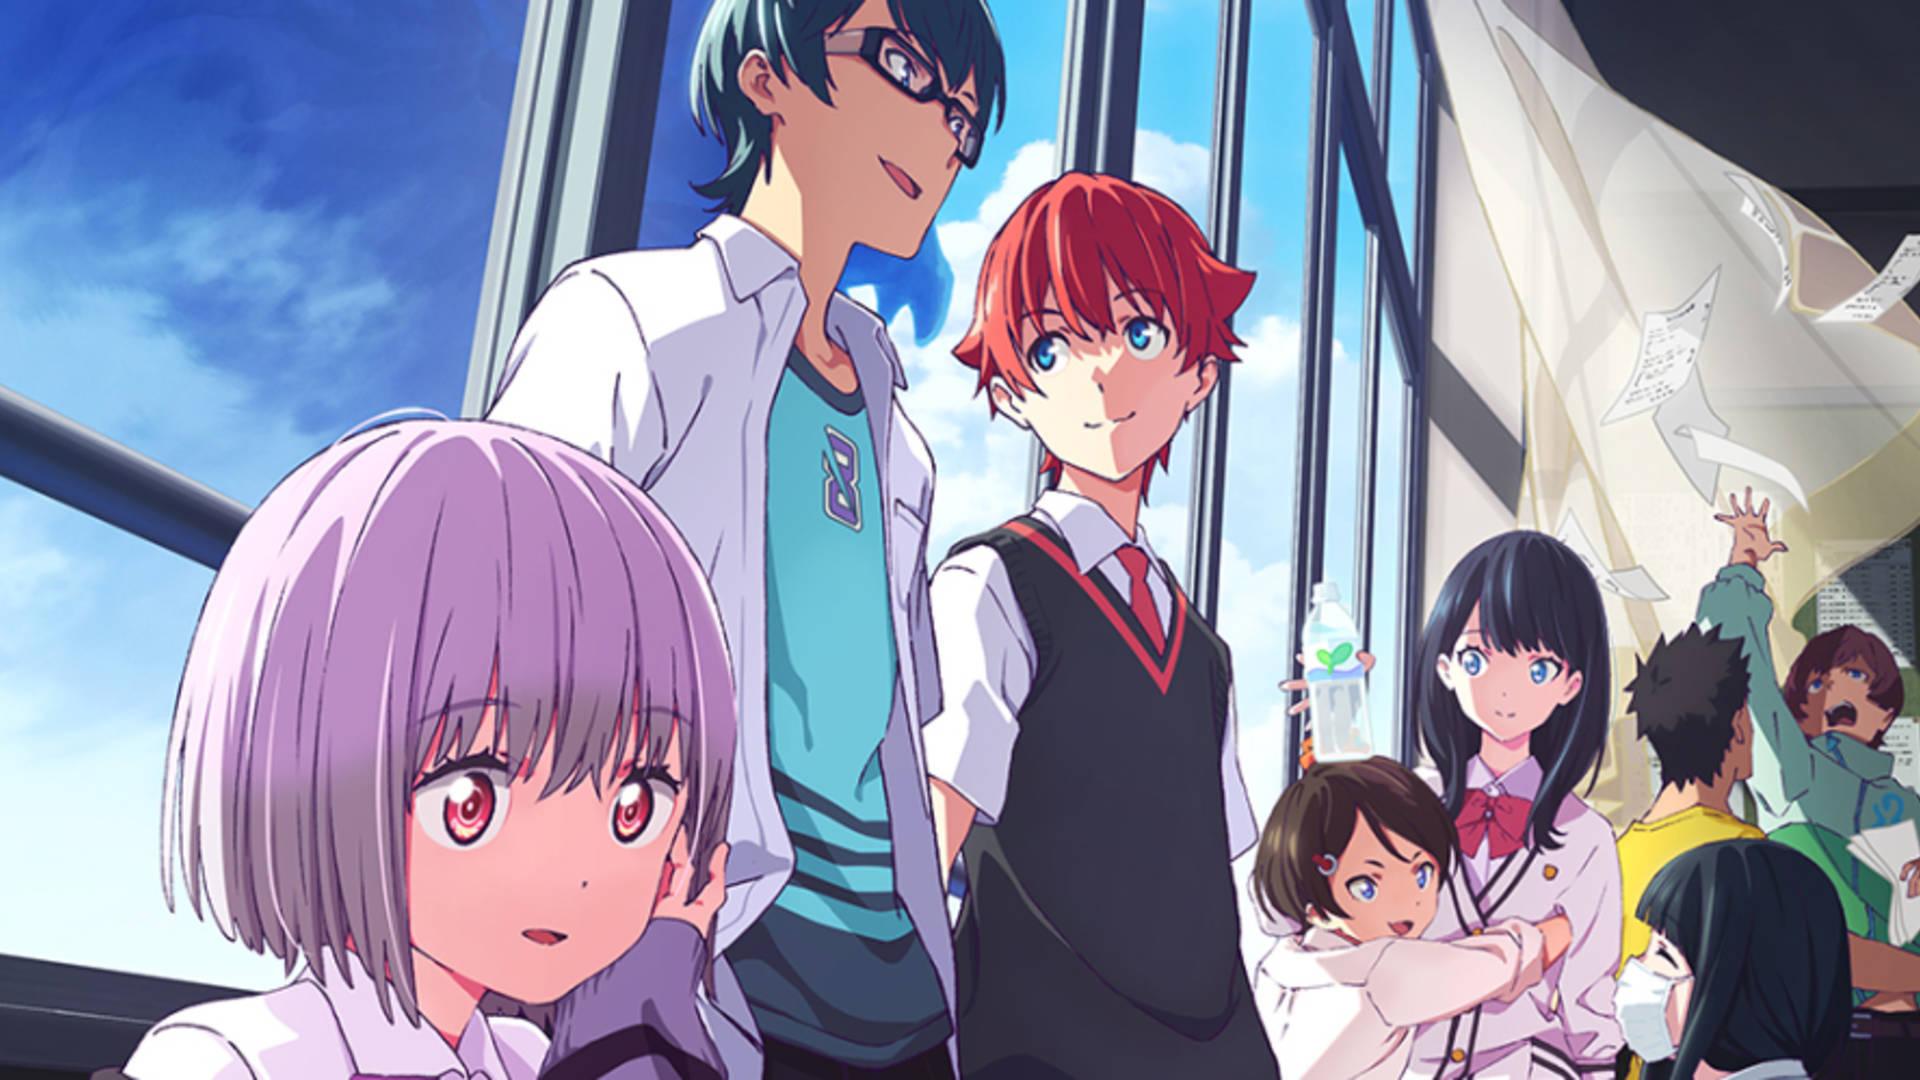 Anime Expo to host World Premiere of SSSS.Gridman